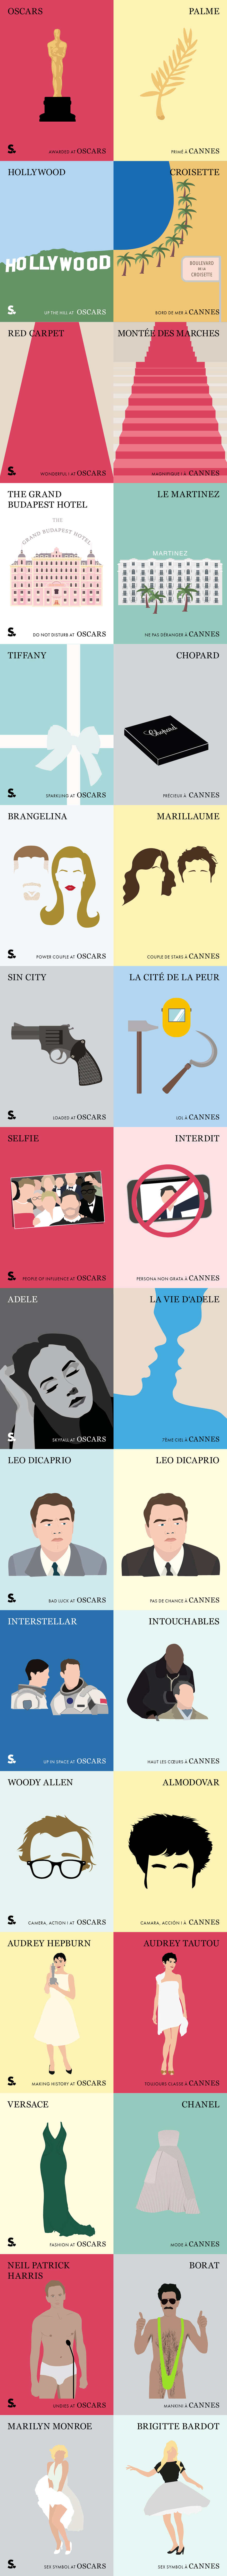 Infographie Oscars Cannes